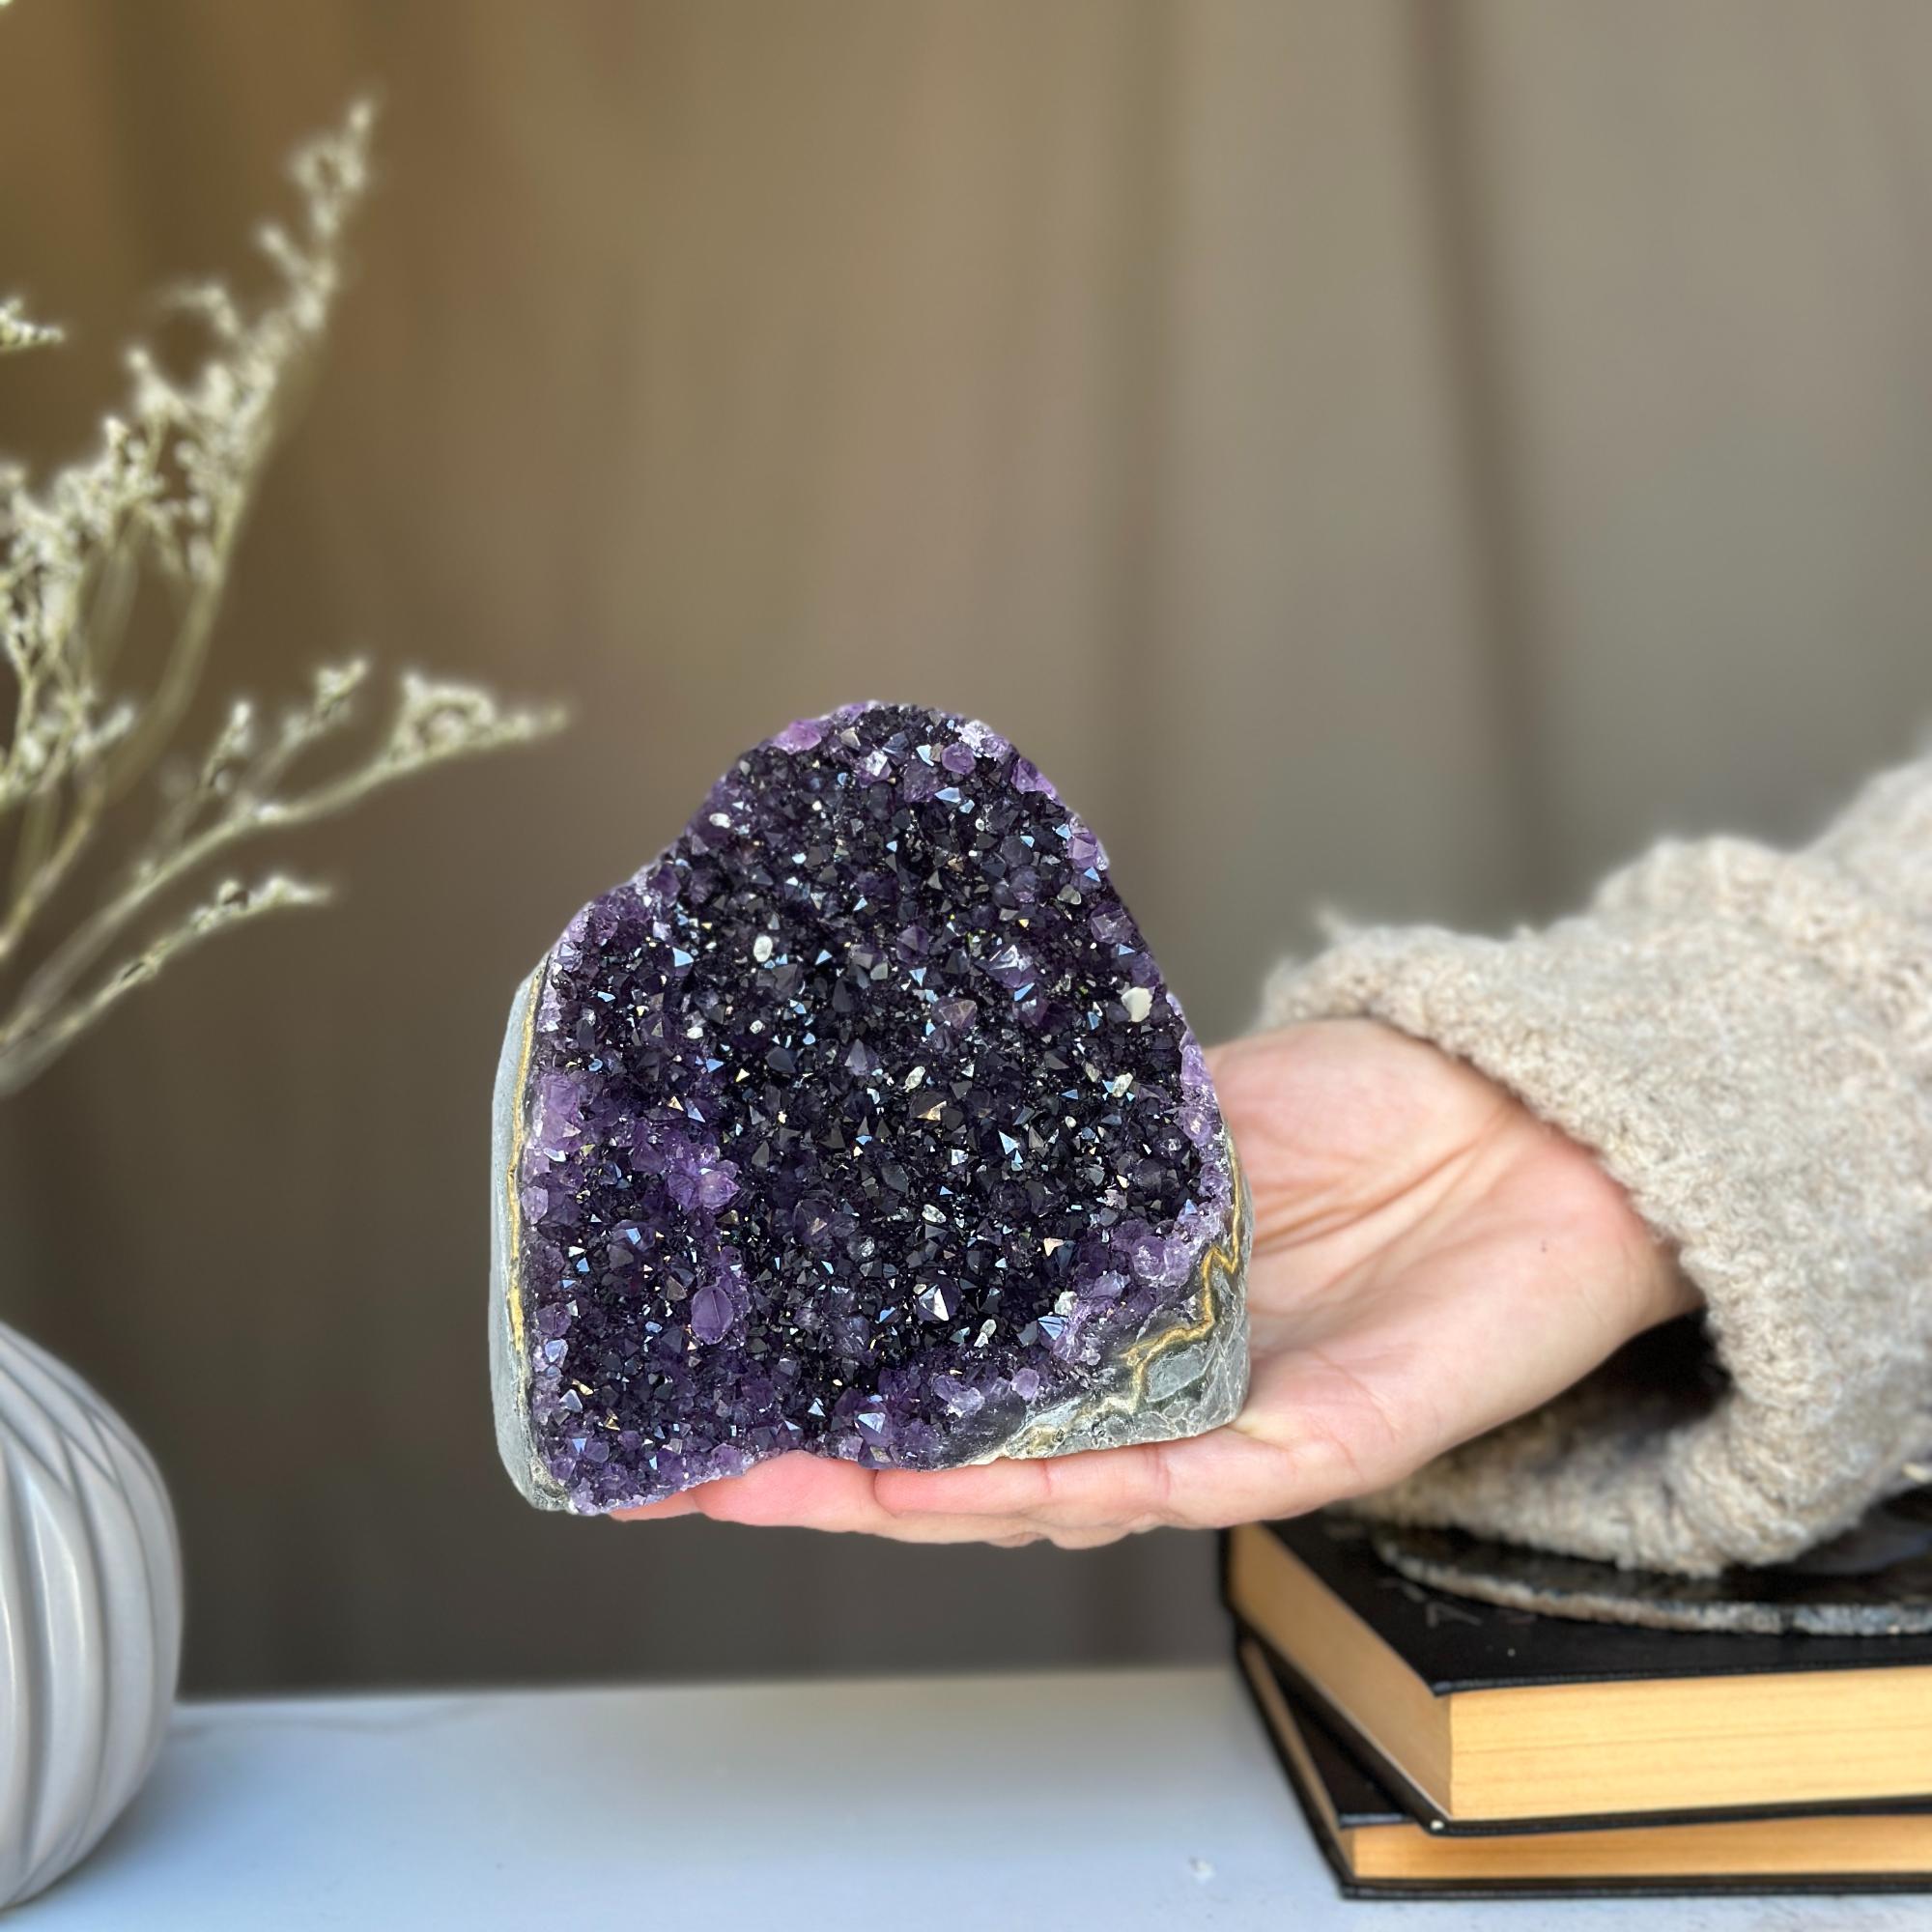 2 Lb Amethyst geode with Agate formations